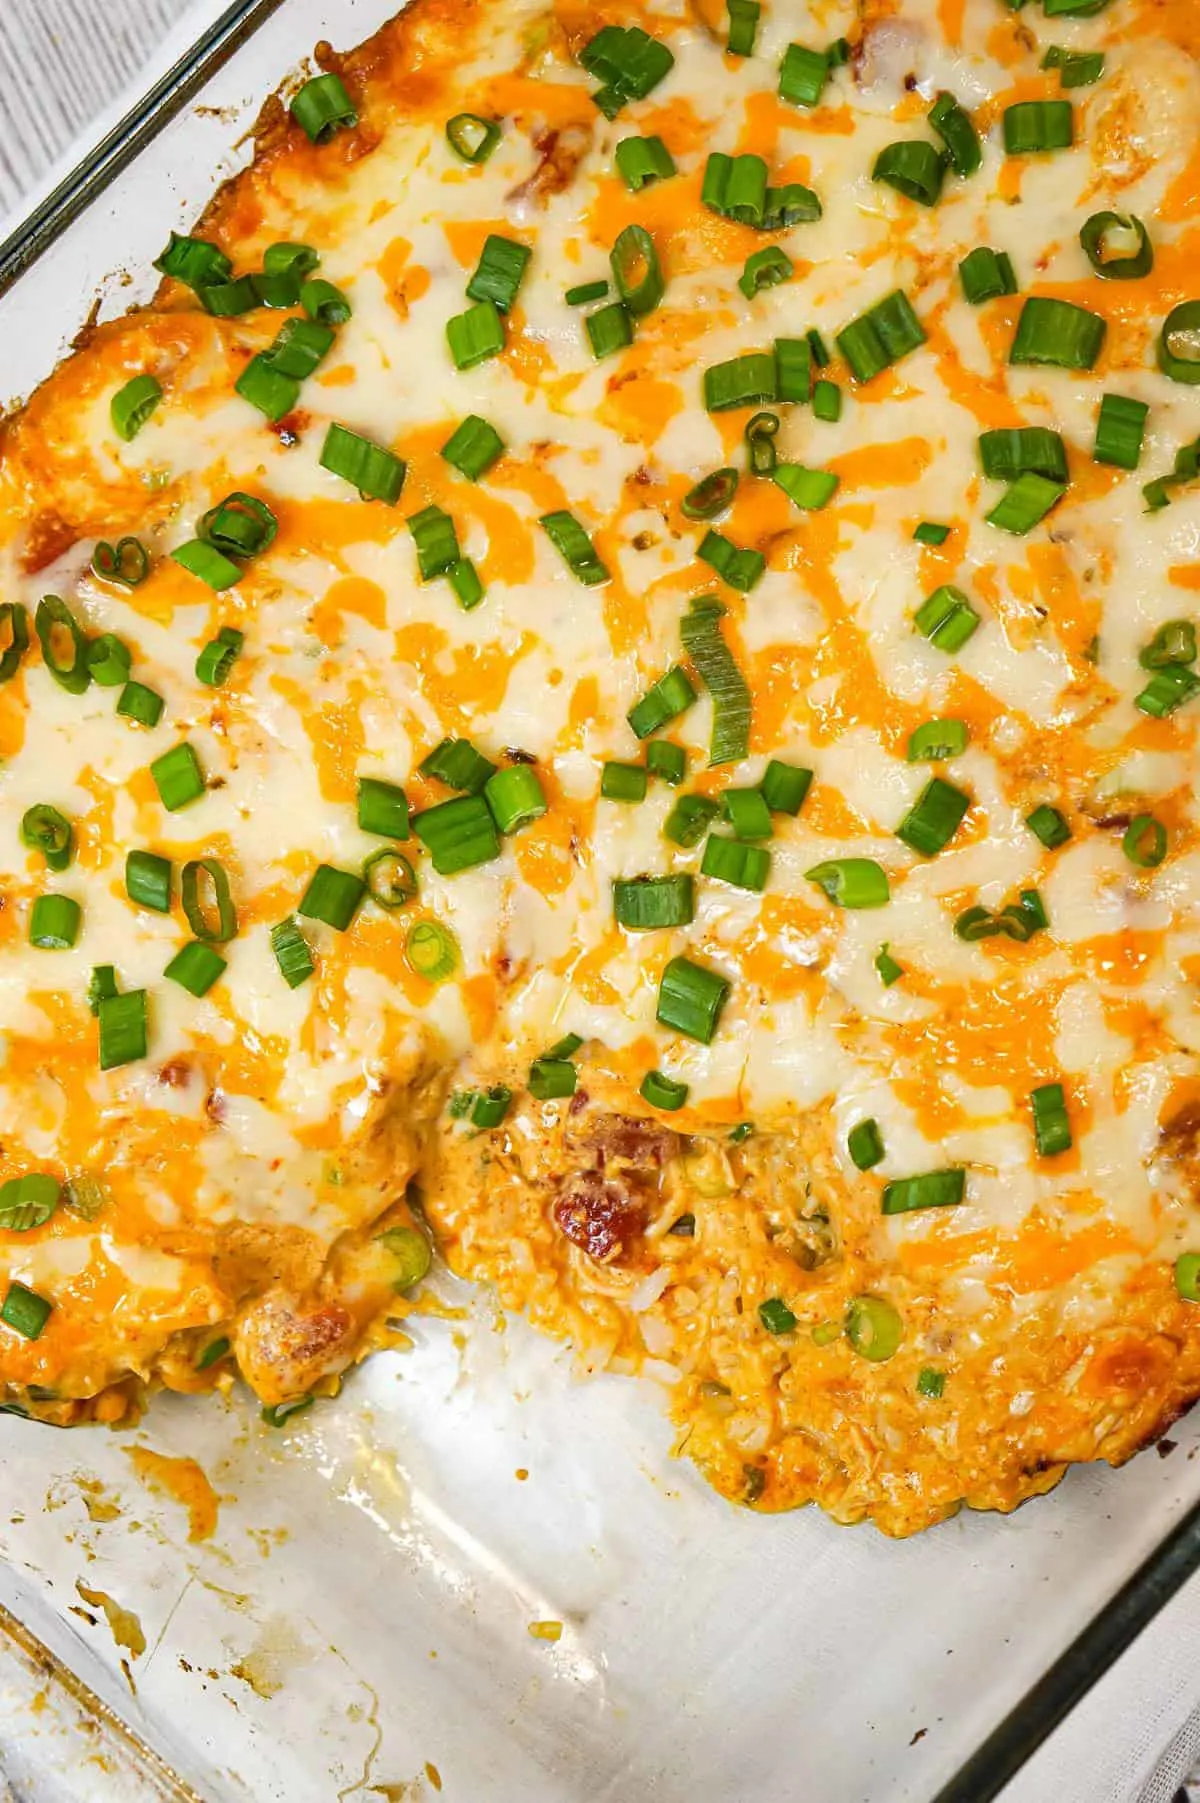 Mexican Chicken Casserole is an easy dinner recipe loaded with Minute rice, shredded rotisserie chicken, Rotel diced tomatoes and green chilies, sour cream and shredded cheese.